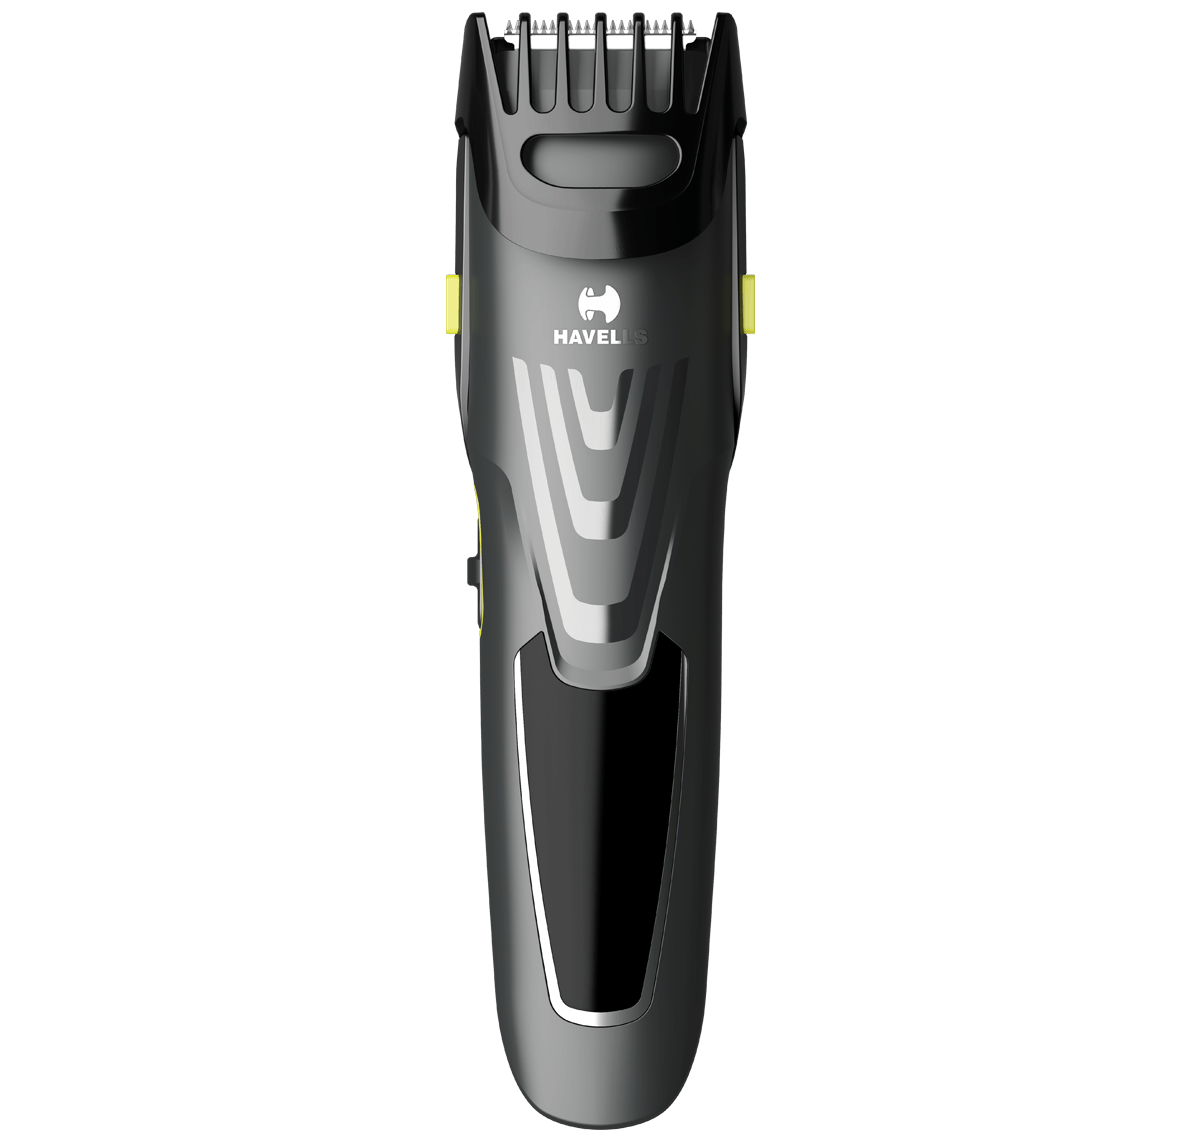 Zoom Wheel Beard Trimmer with 20 length settings